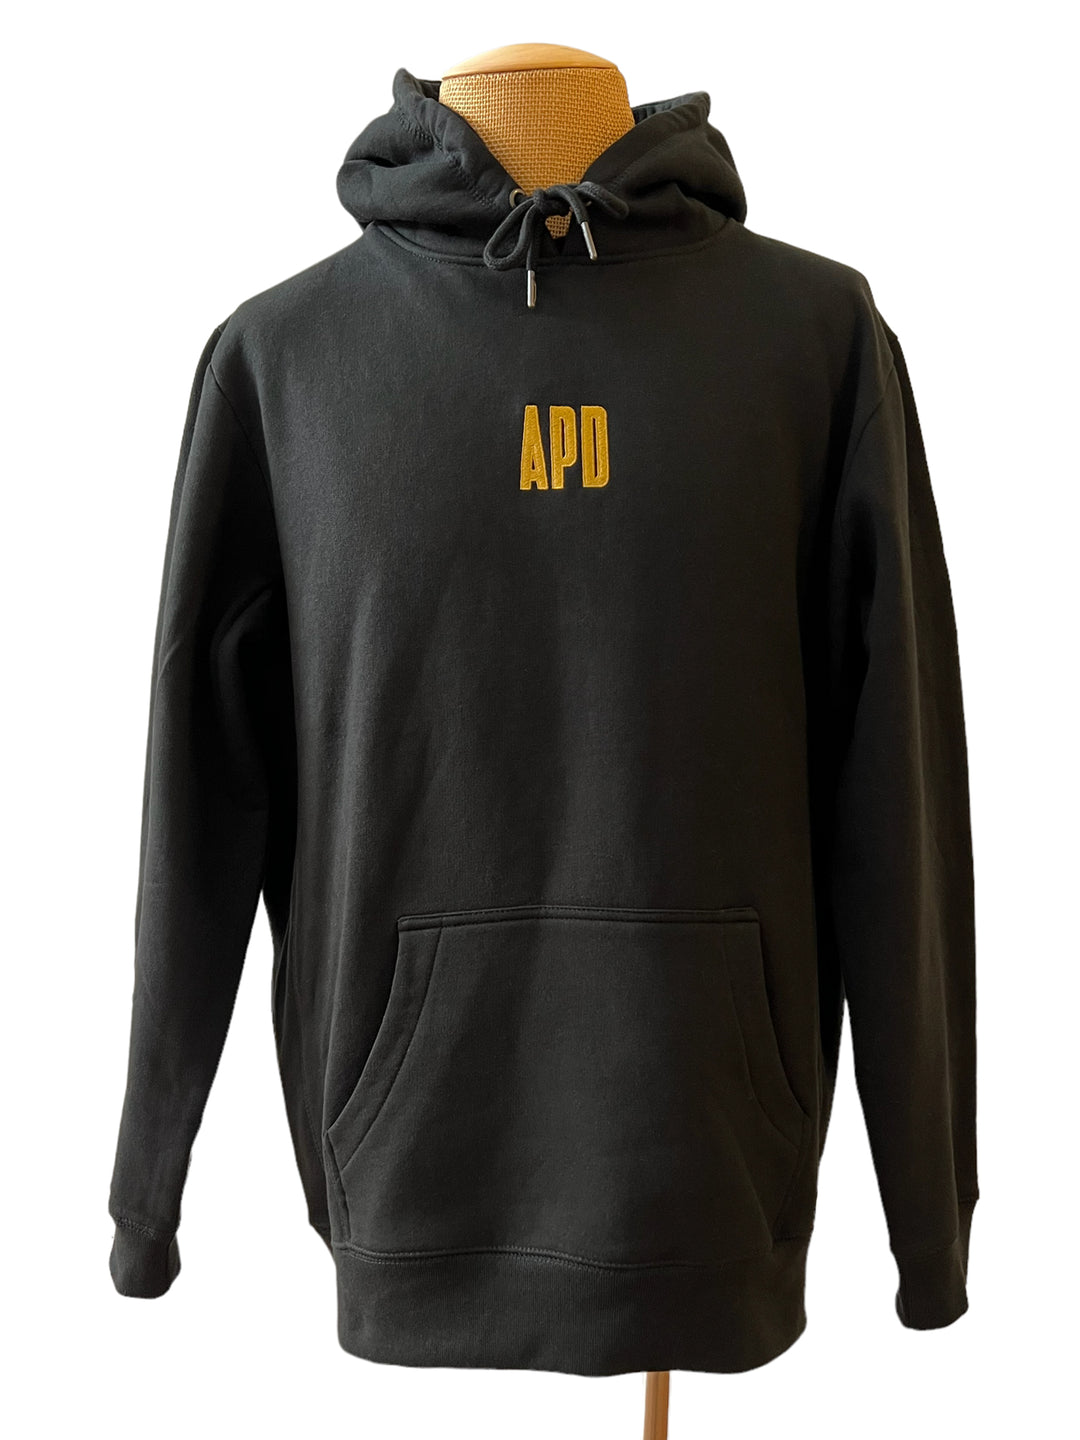 Hooded Sweatshirt in Black with Gold Frame Graphic